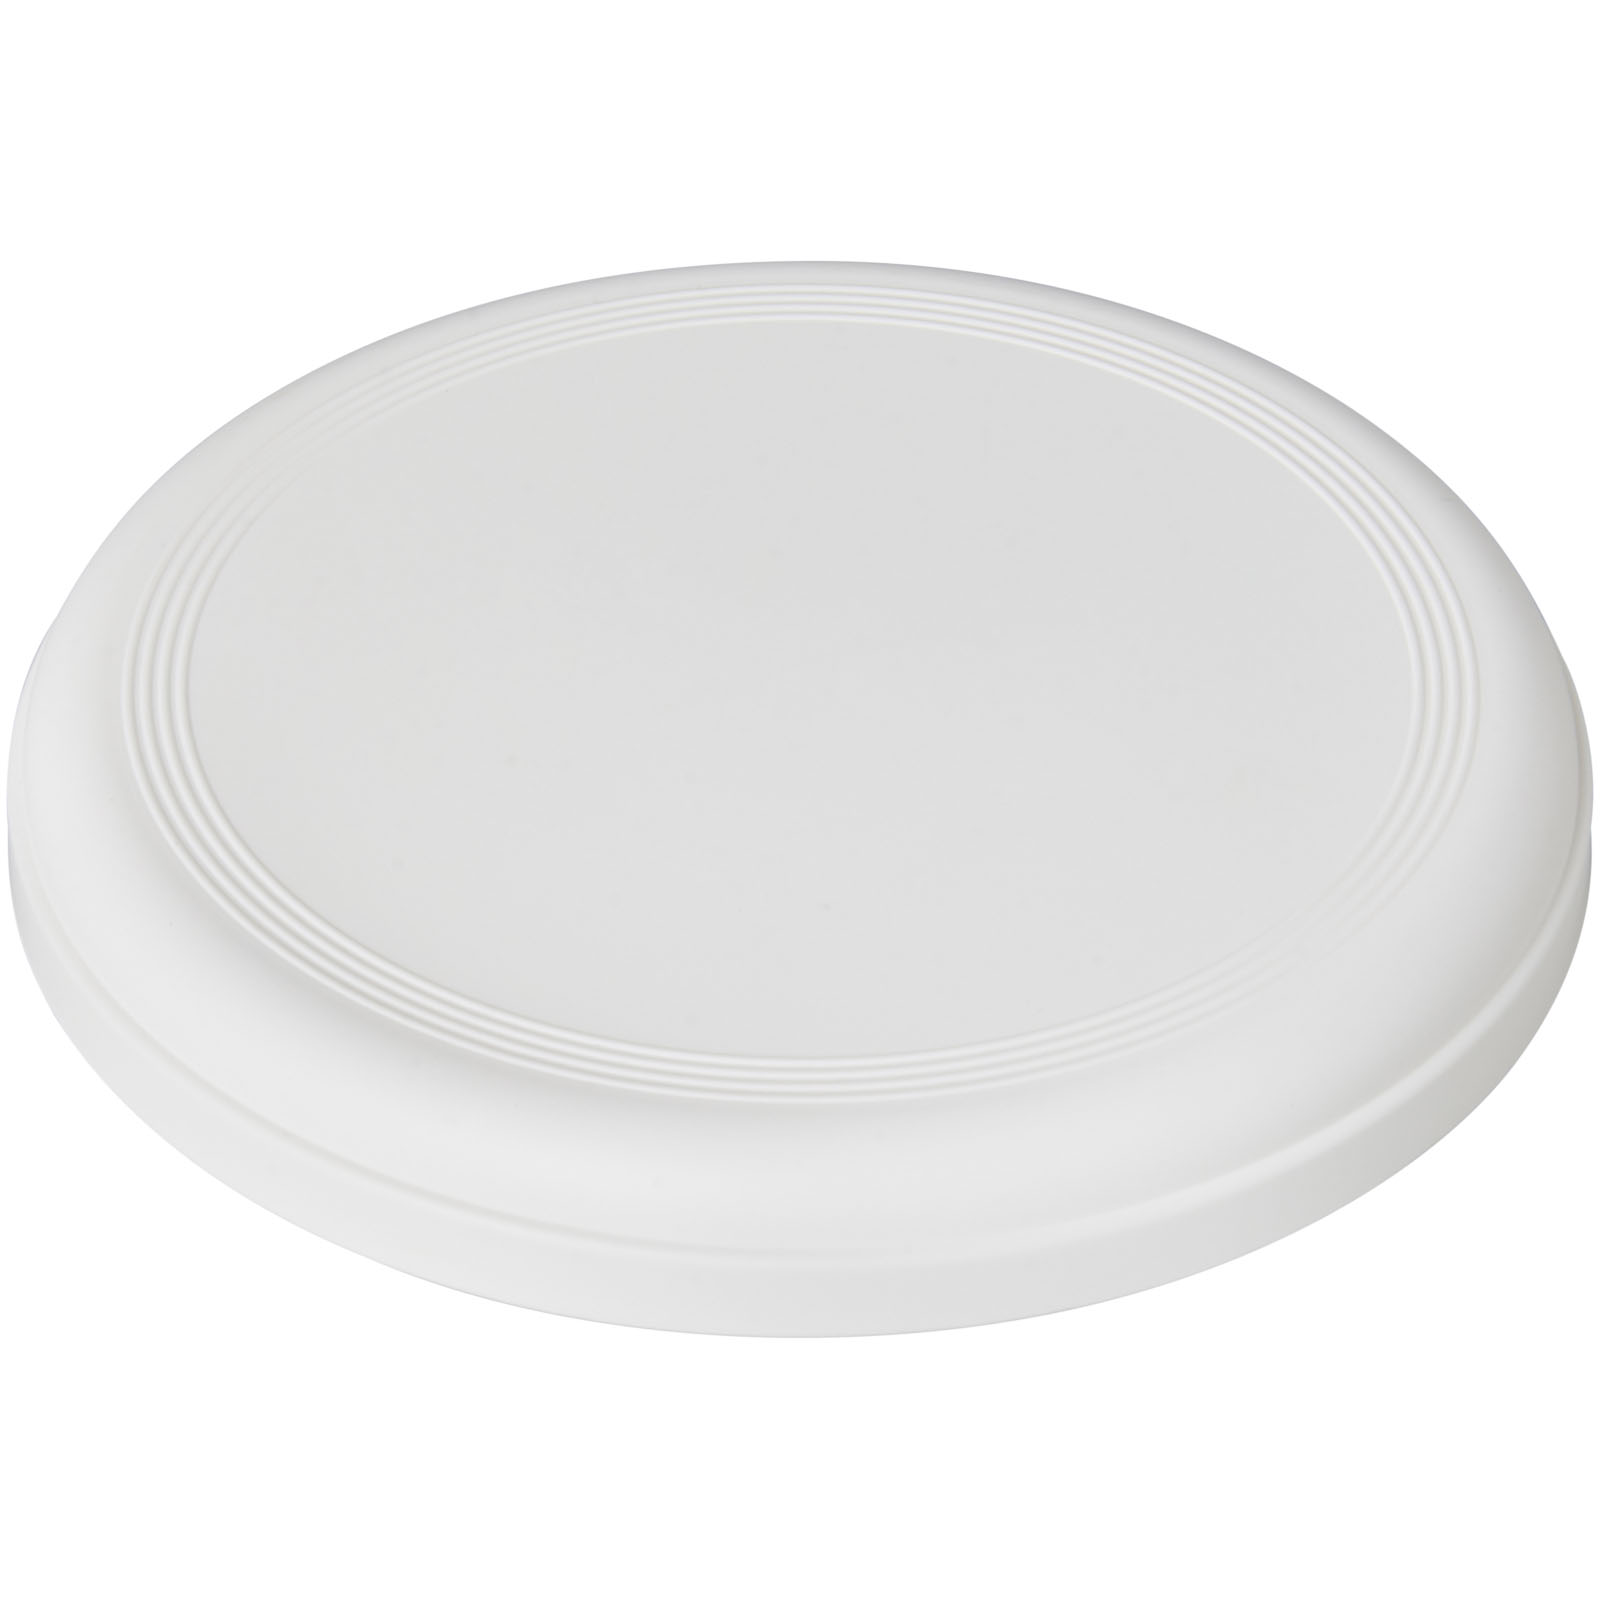 Outdoor Games - Crest recycled frisbee